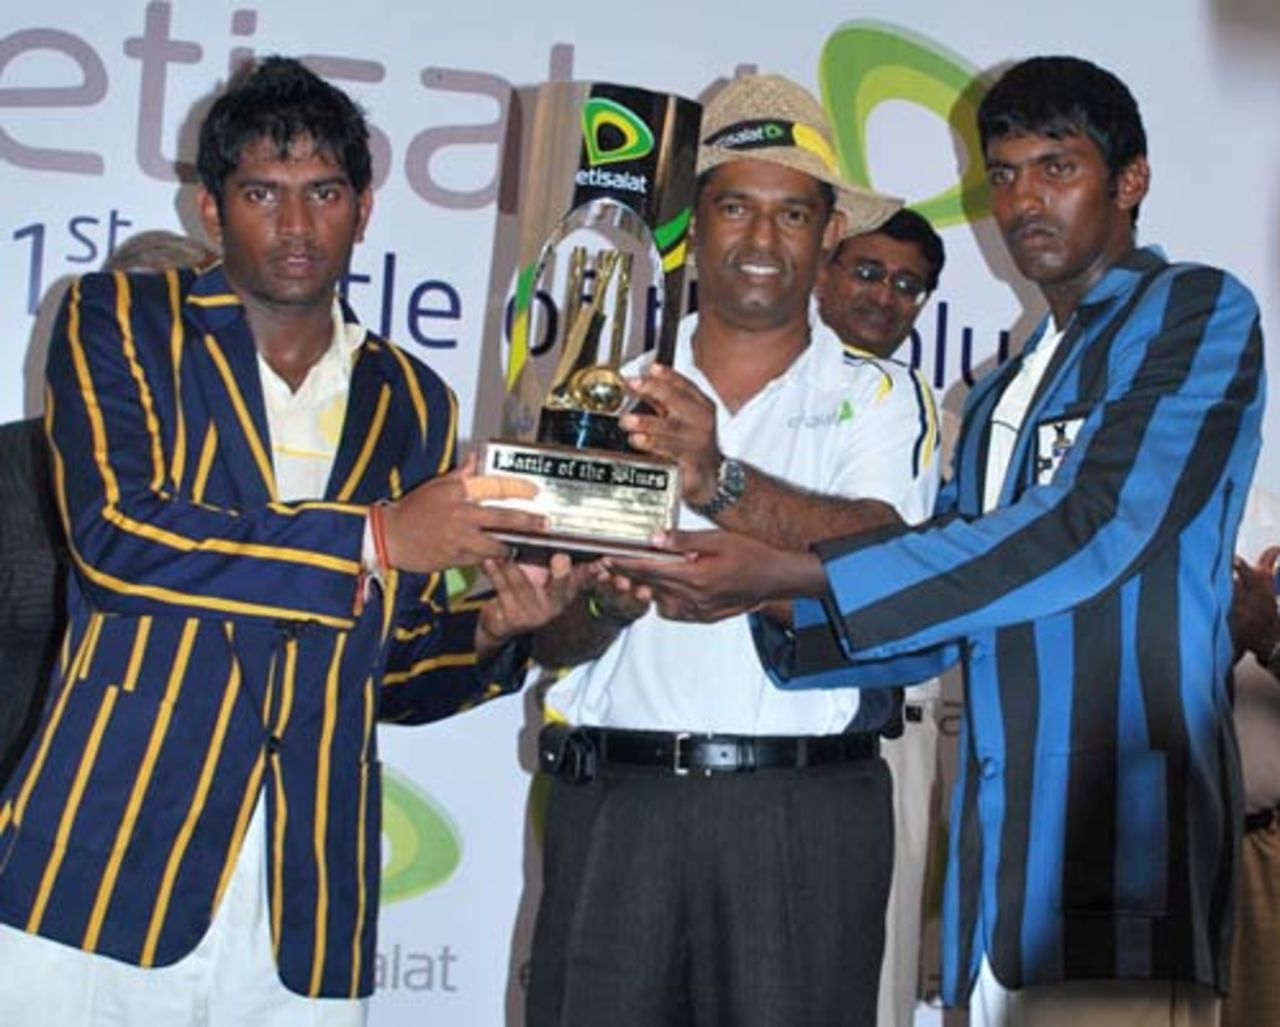 The two captains, Bhanuka Rajapaksa and Dinesh Walpita, share the trophy, Royal College v St. Thomas College, SSC, Colombo, March 11-13, 2010